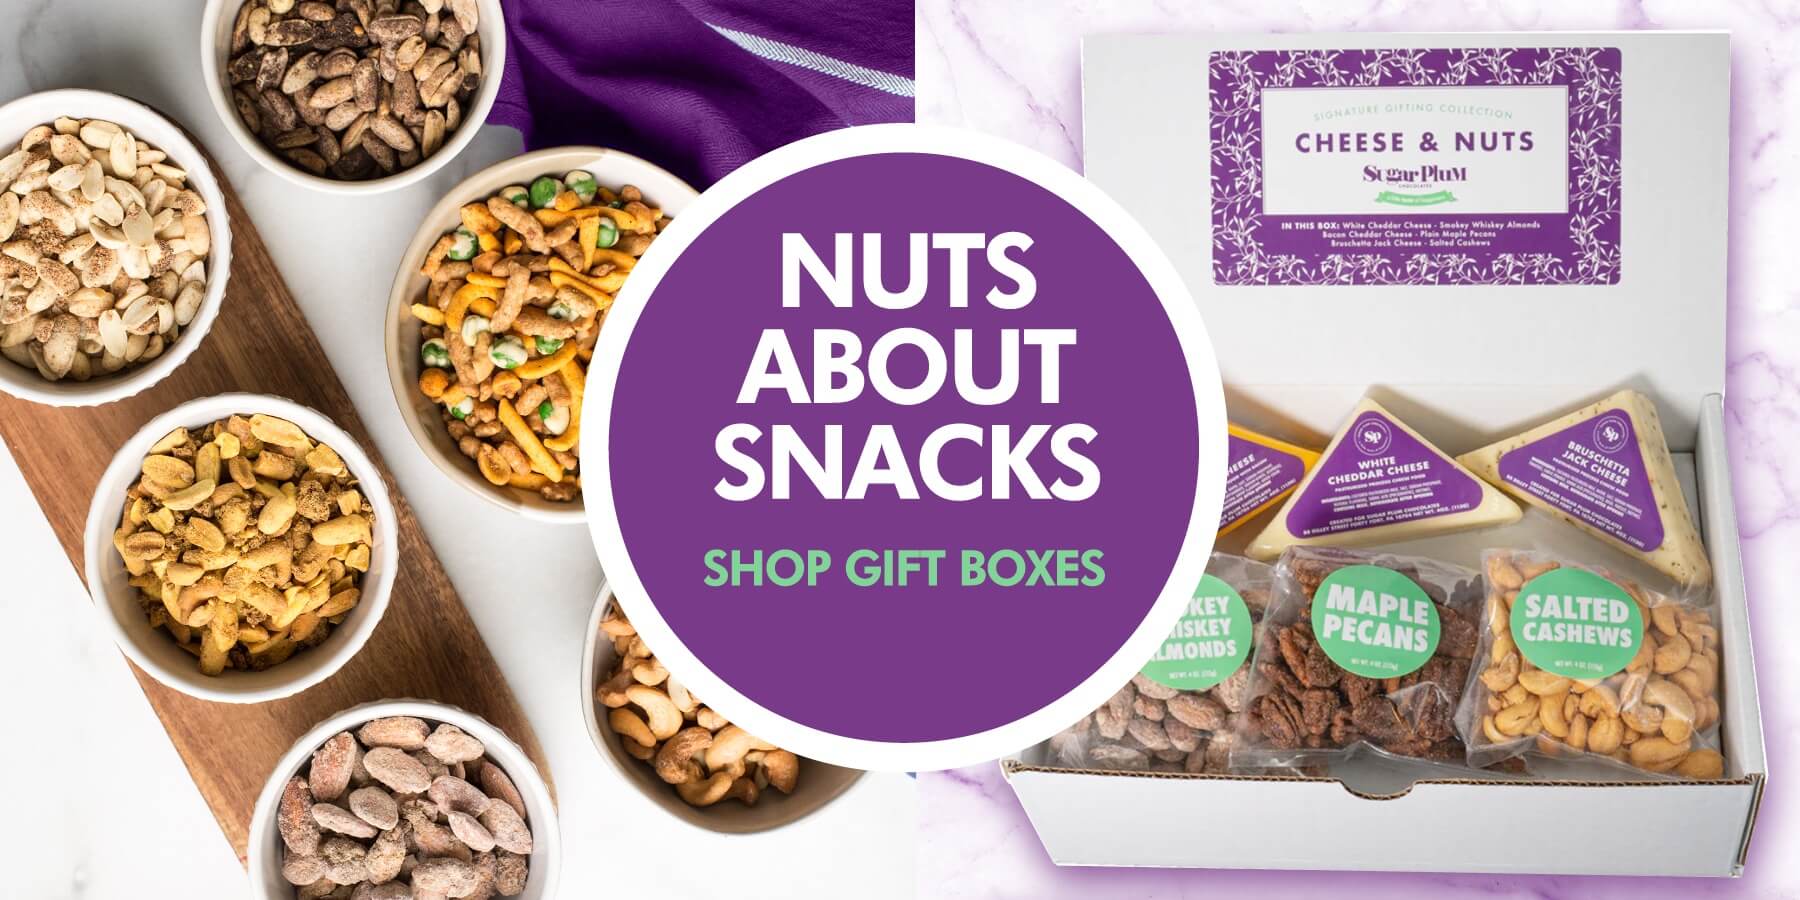 Nuts about snacks. Shop gift boxes.